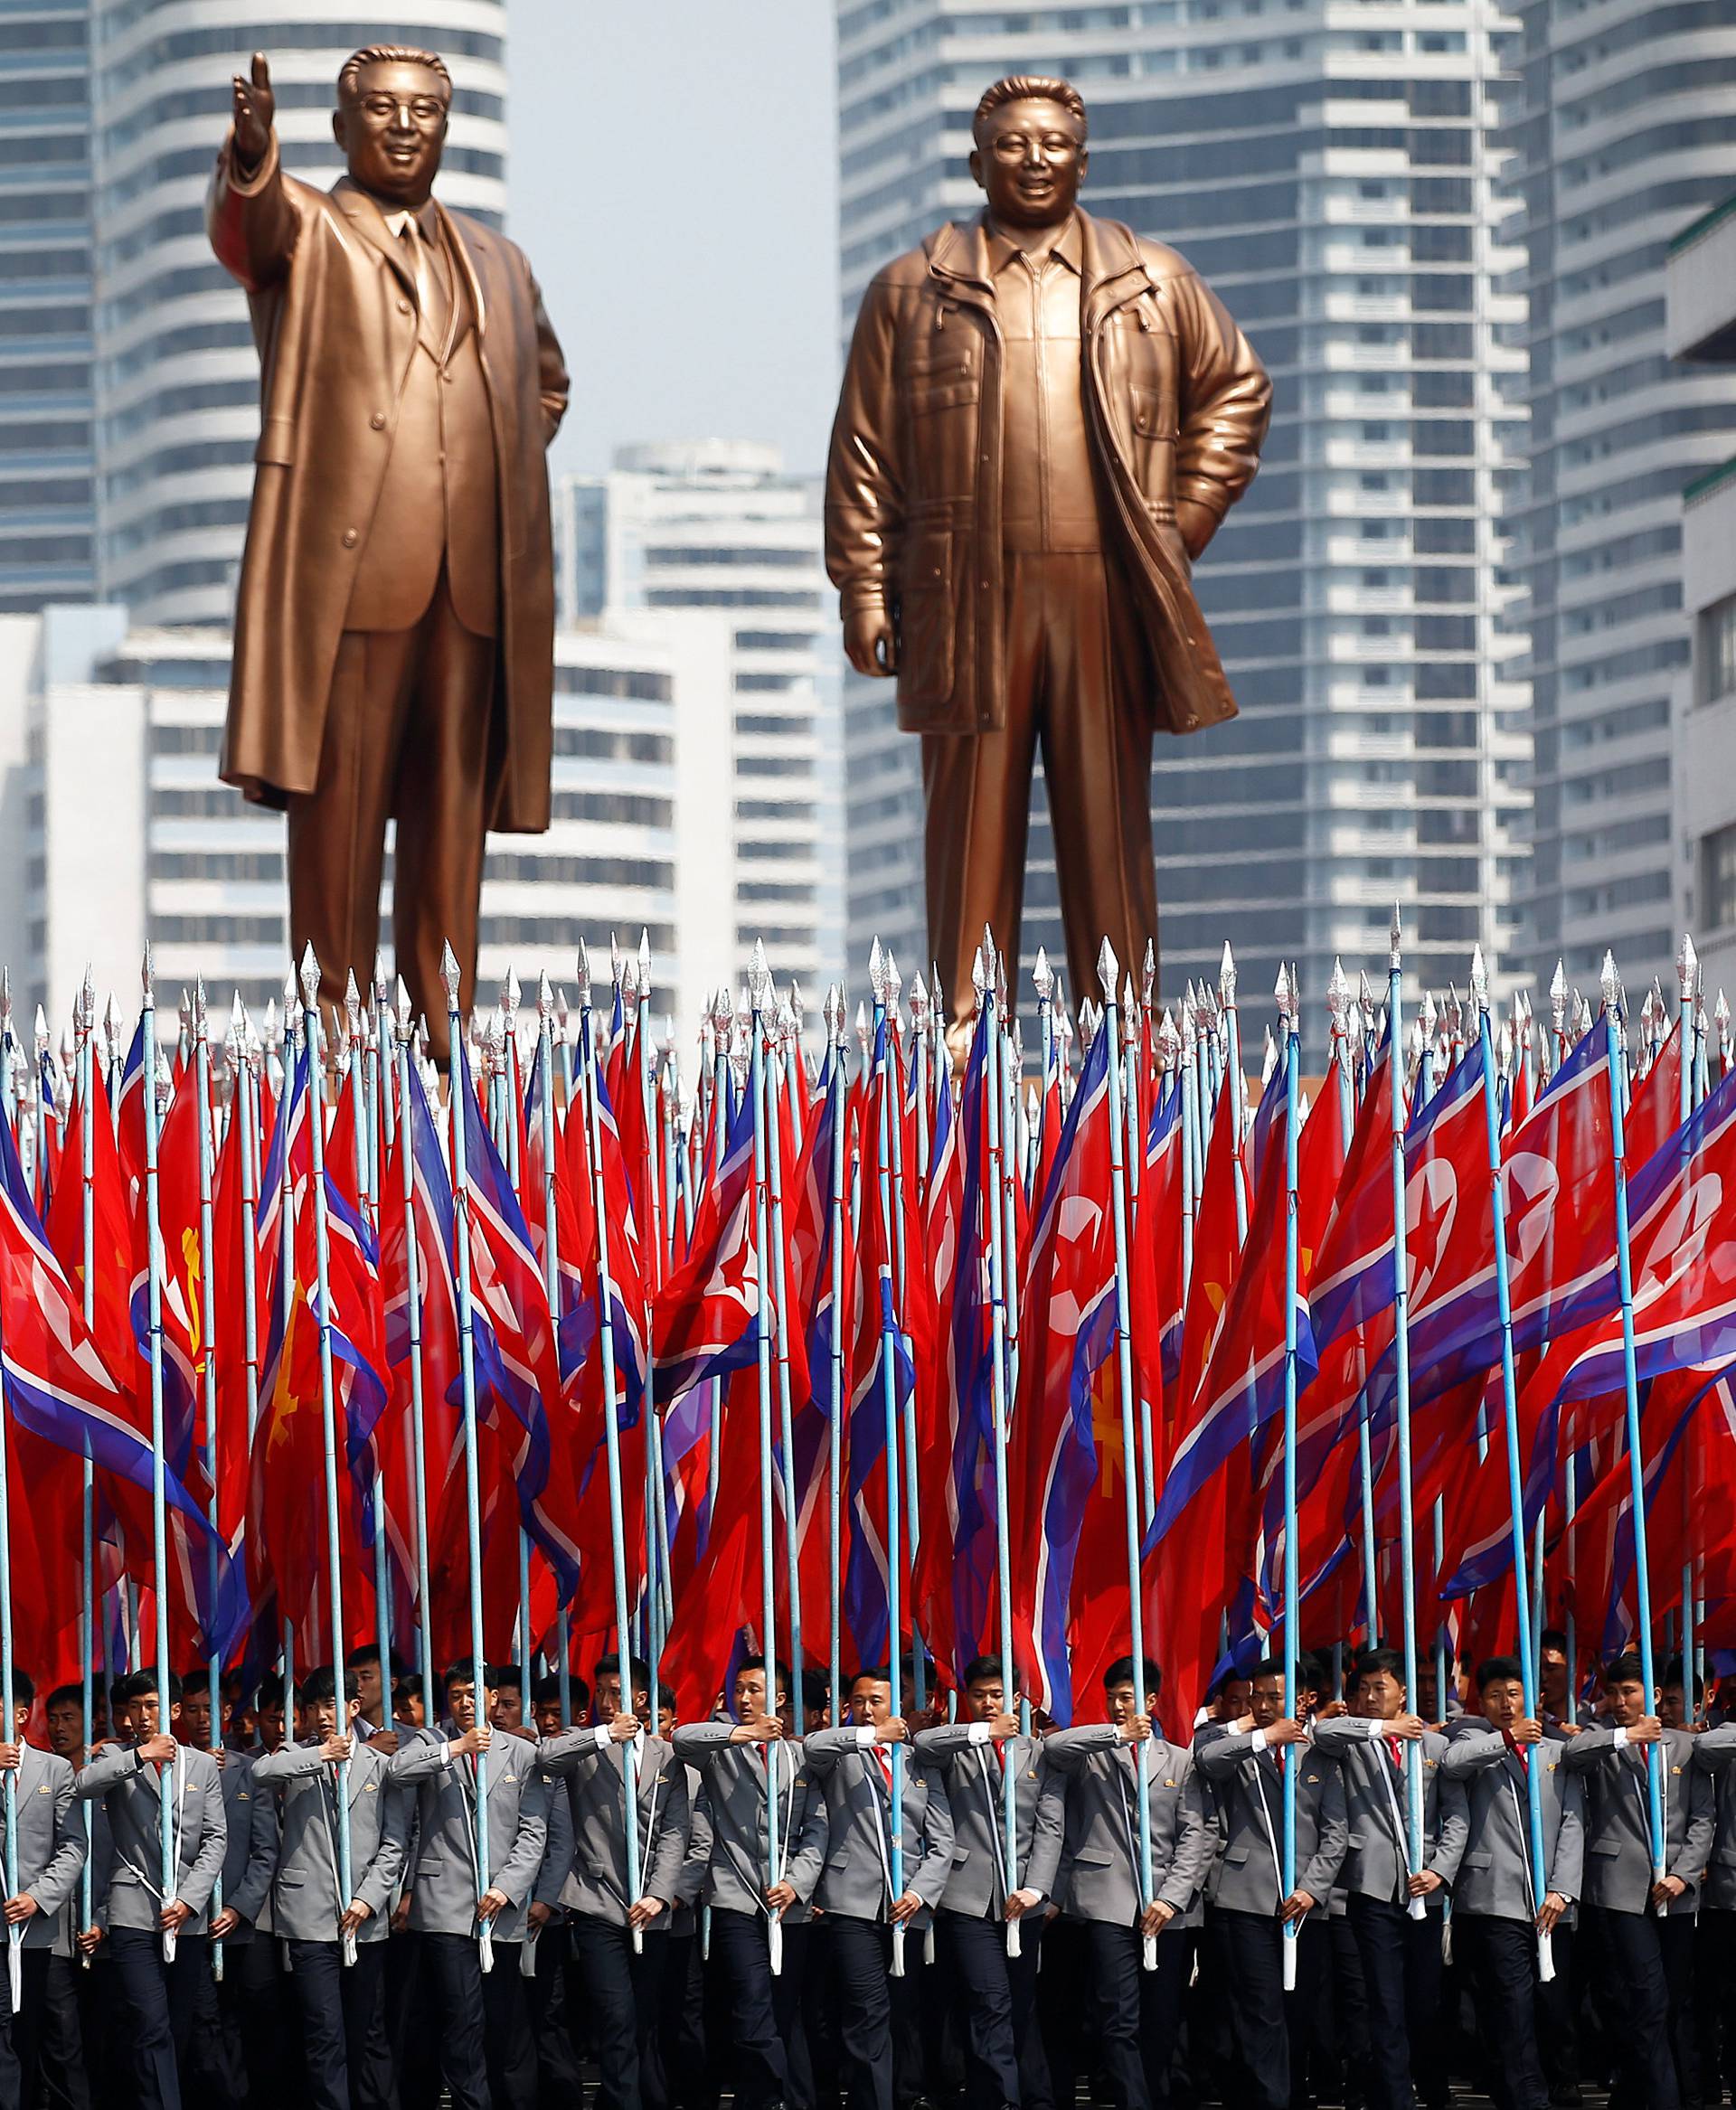 People carry flags in front of statues of North Korea founder Kim Il Sung and late leader Kim Jong Il during a military parade marking the 105th birth anniversary Kim Il Sung in Pyongyang